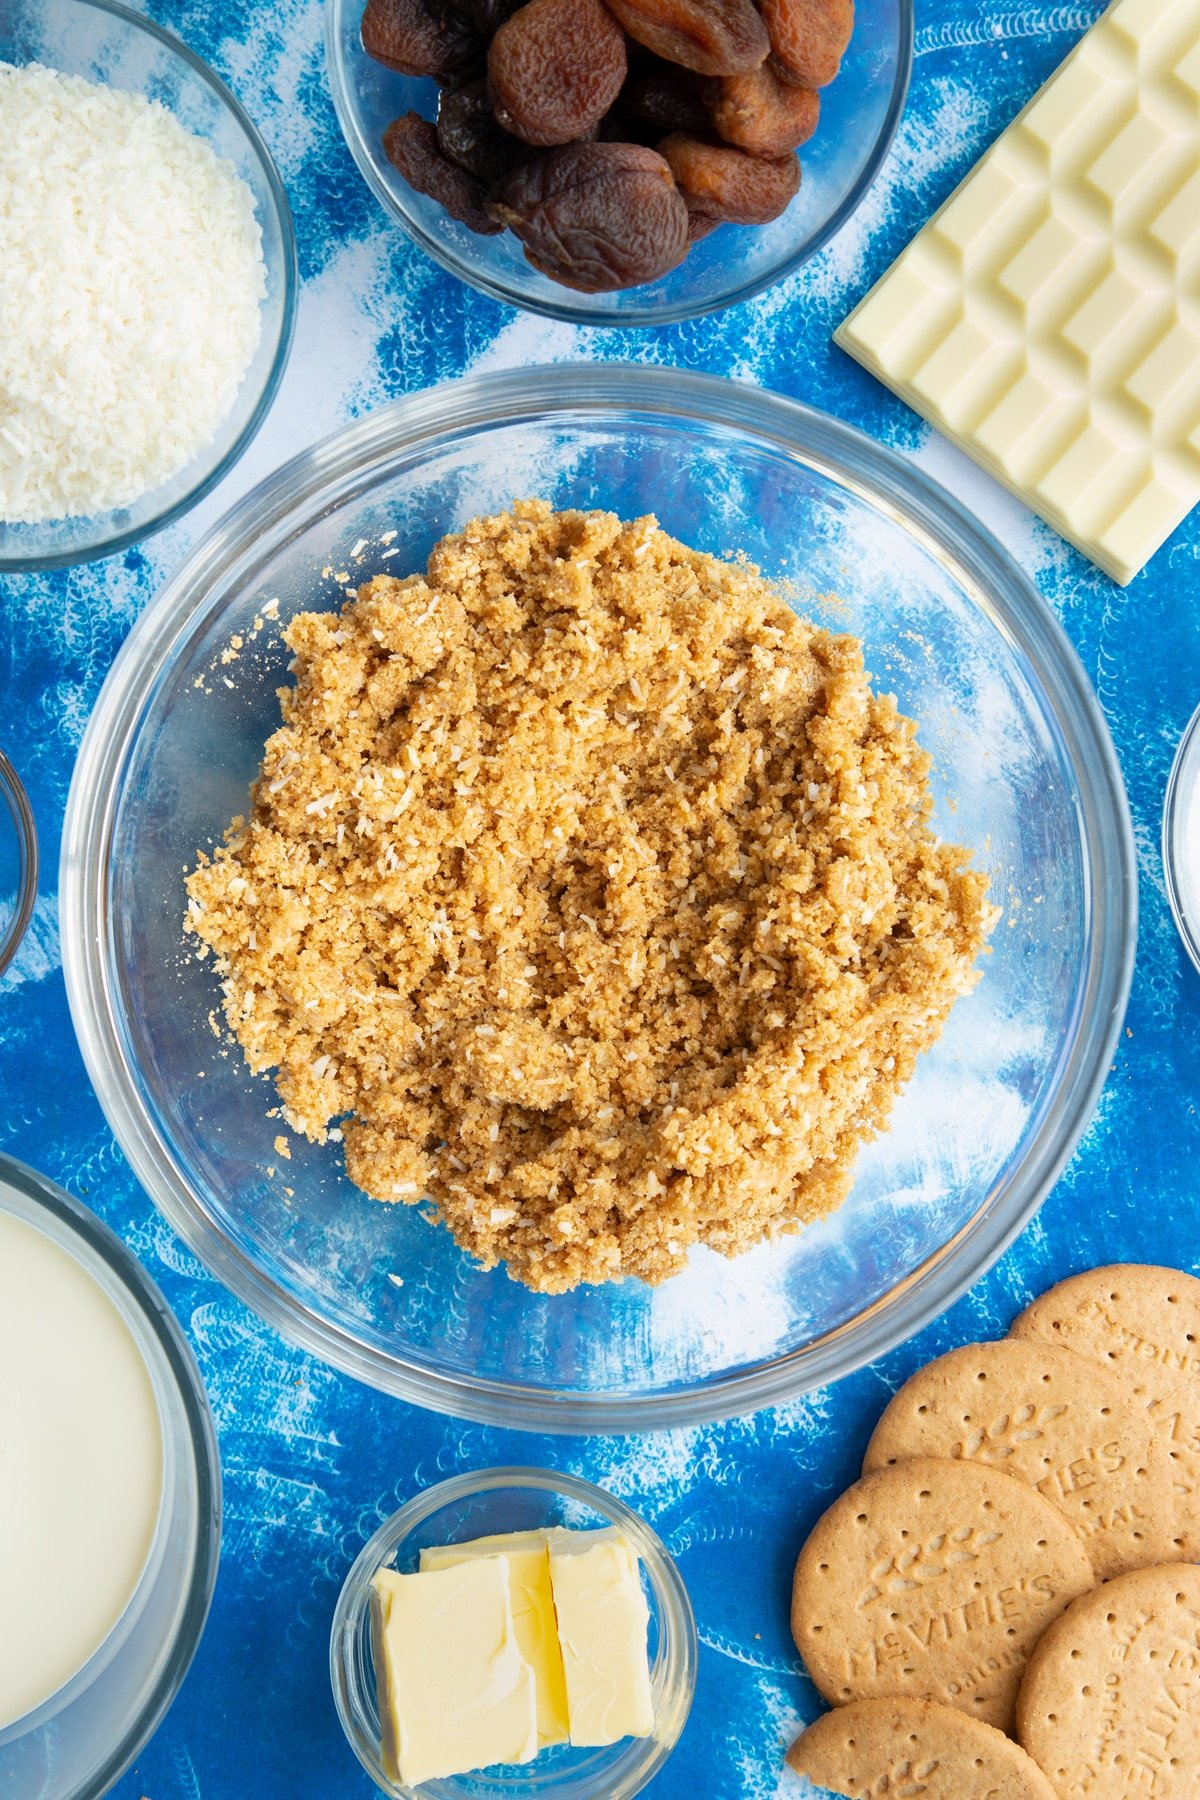 Crushed biscuits and desiccated coconut mixed together with melted butter in a bowl. Ingredients to make an apricot cheesecake surround the bowl.